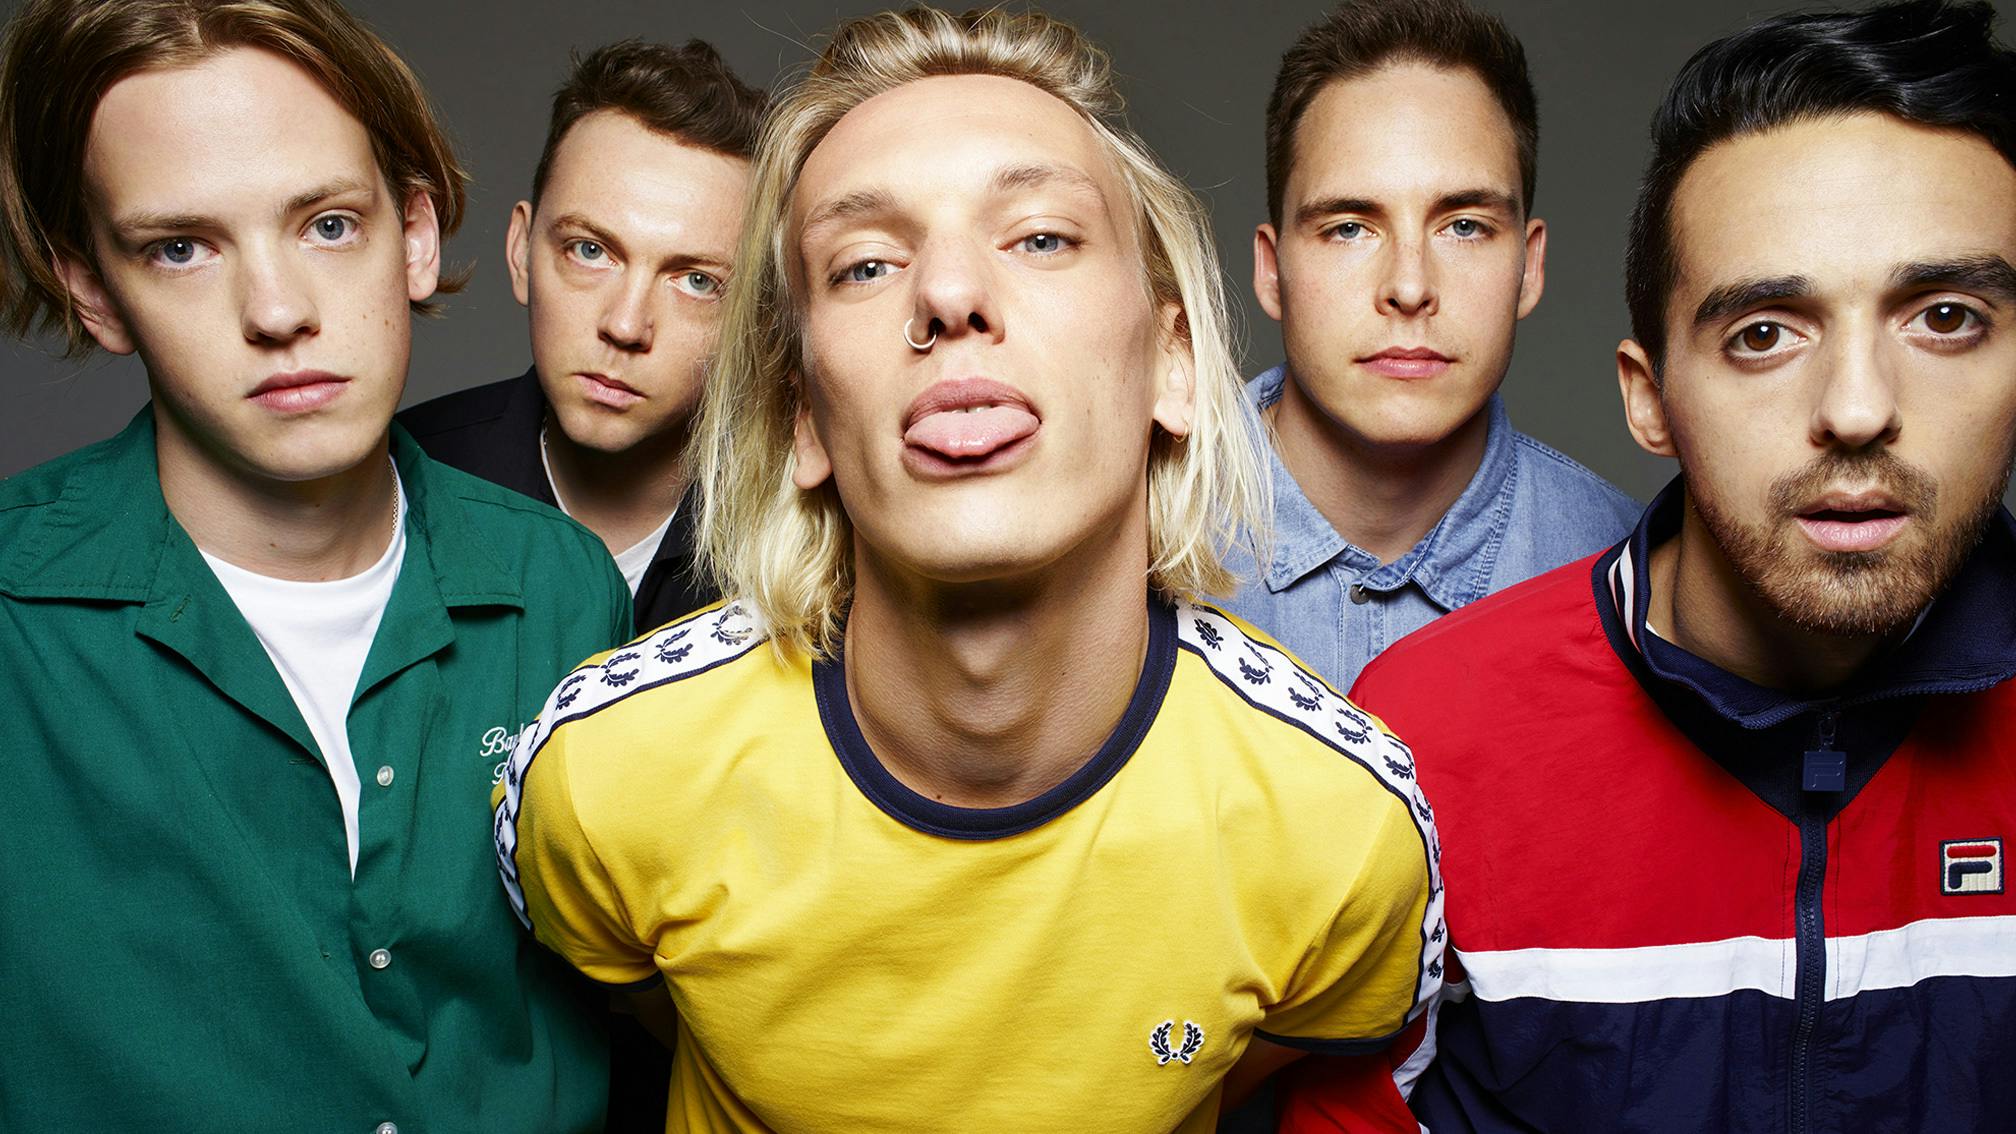 COUNTERFEIT split up; Jamie Campbell Bower launches new solo project